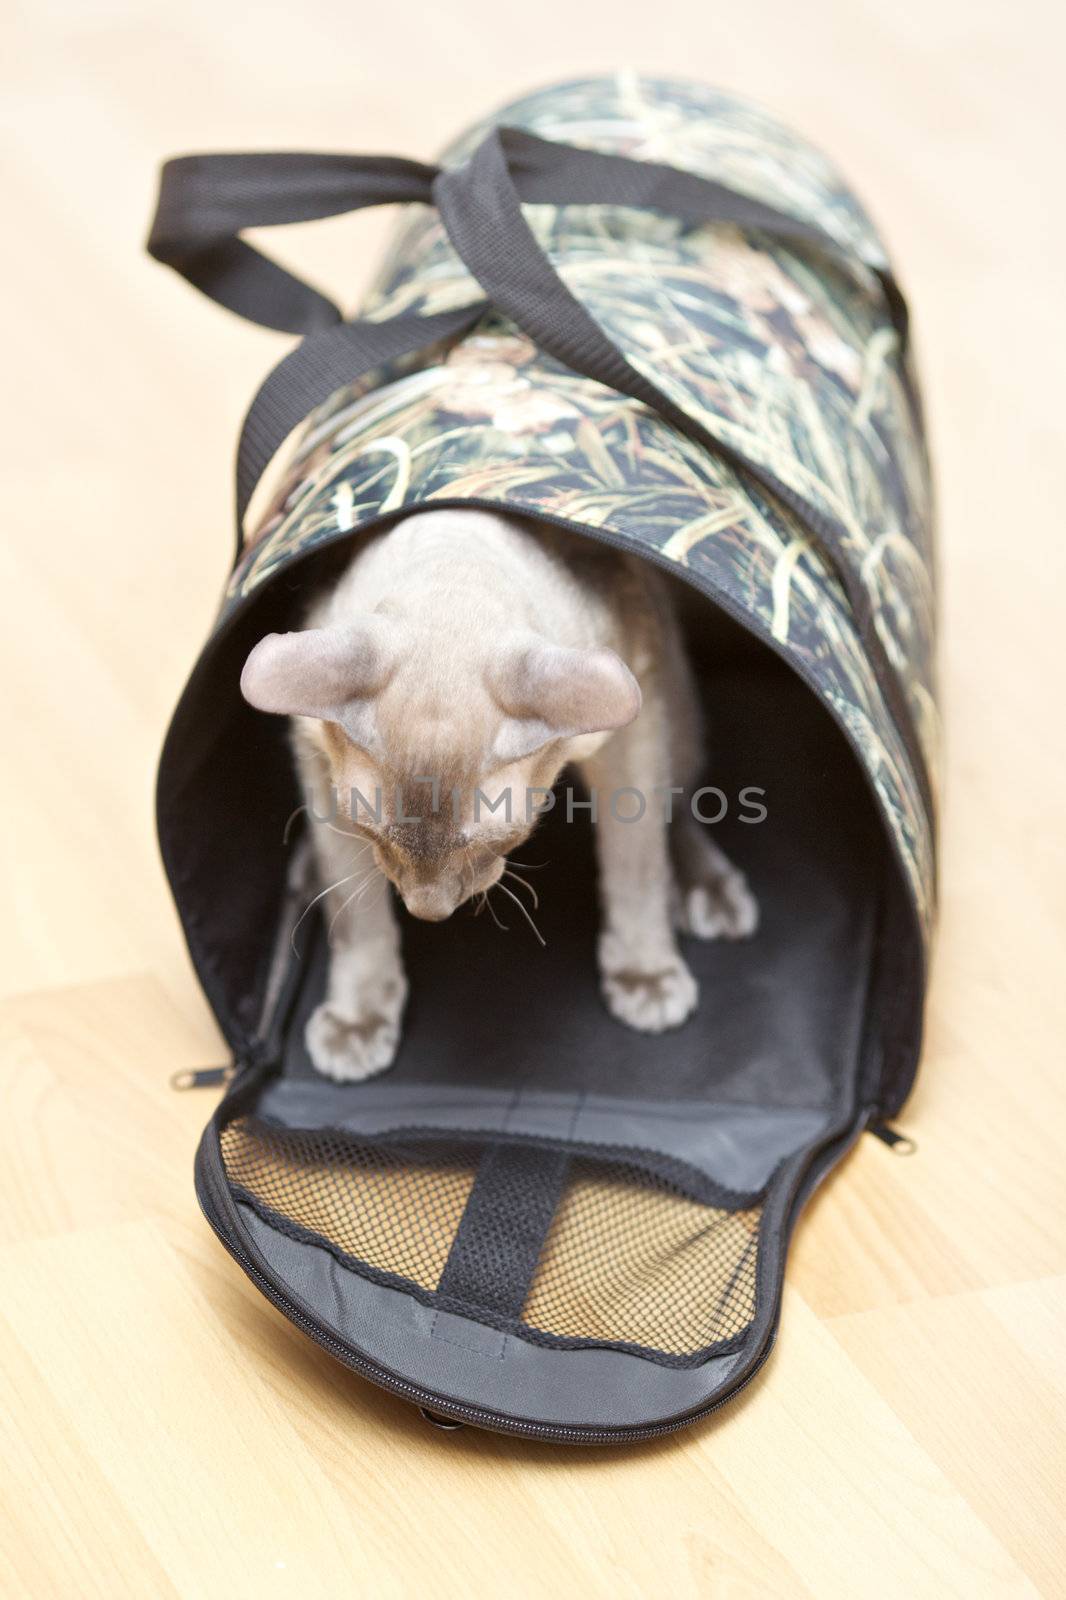 Hairless Cat in Carrier by petr_malyshev